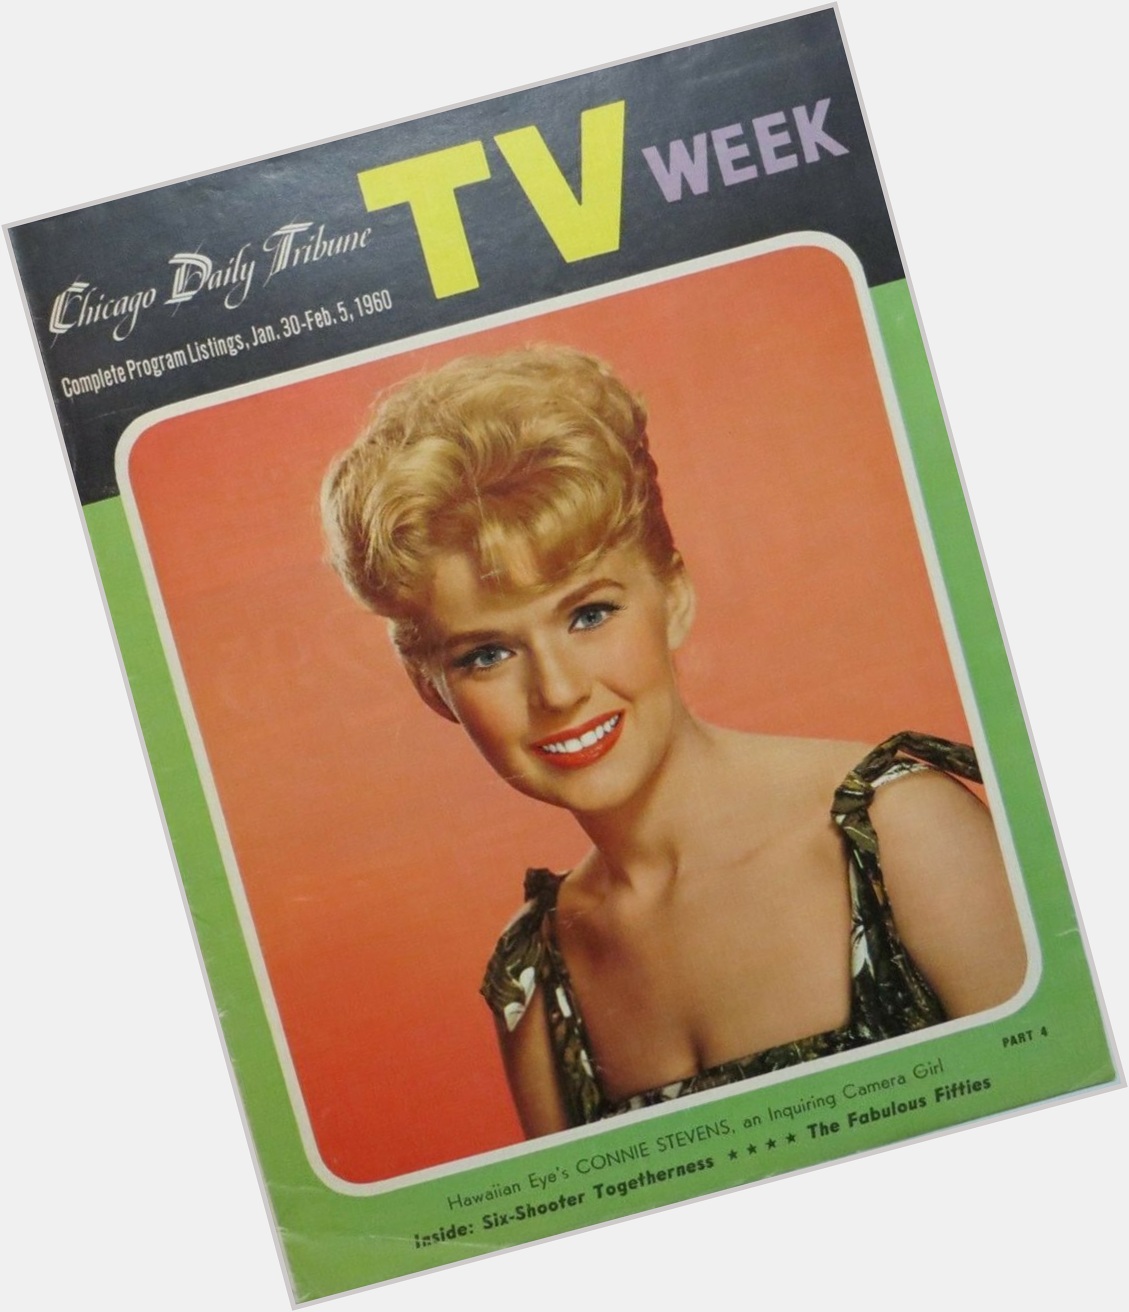 Happy Birthday to Connie Stevens, born on this day in 1938!
Chicago Tribune TV Week.  January 30 - February 5, 1960 